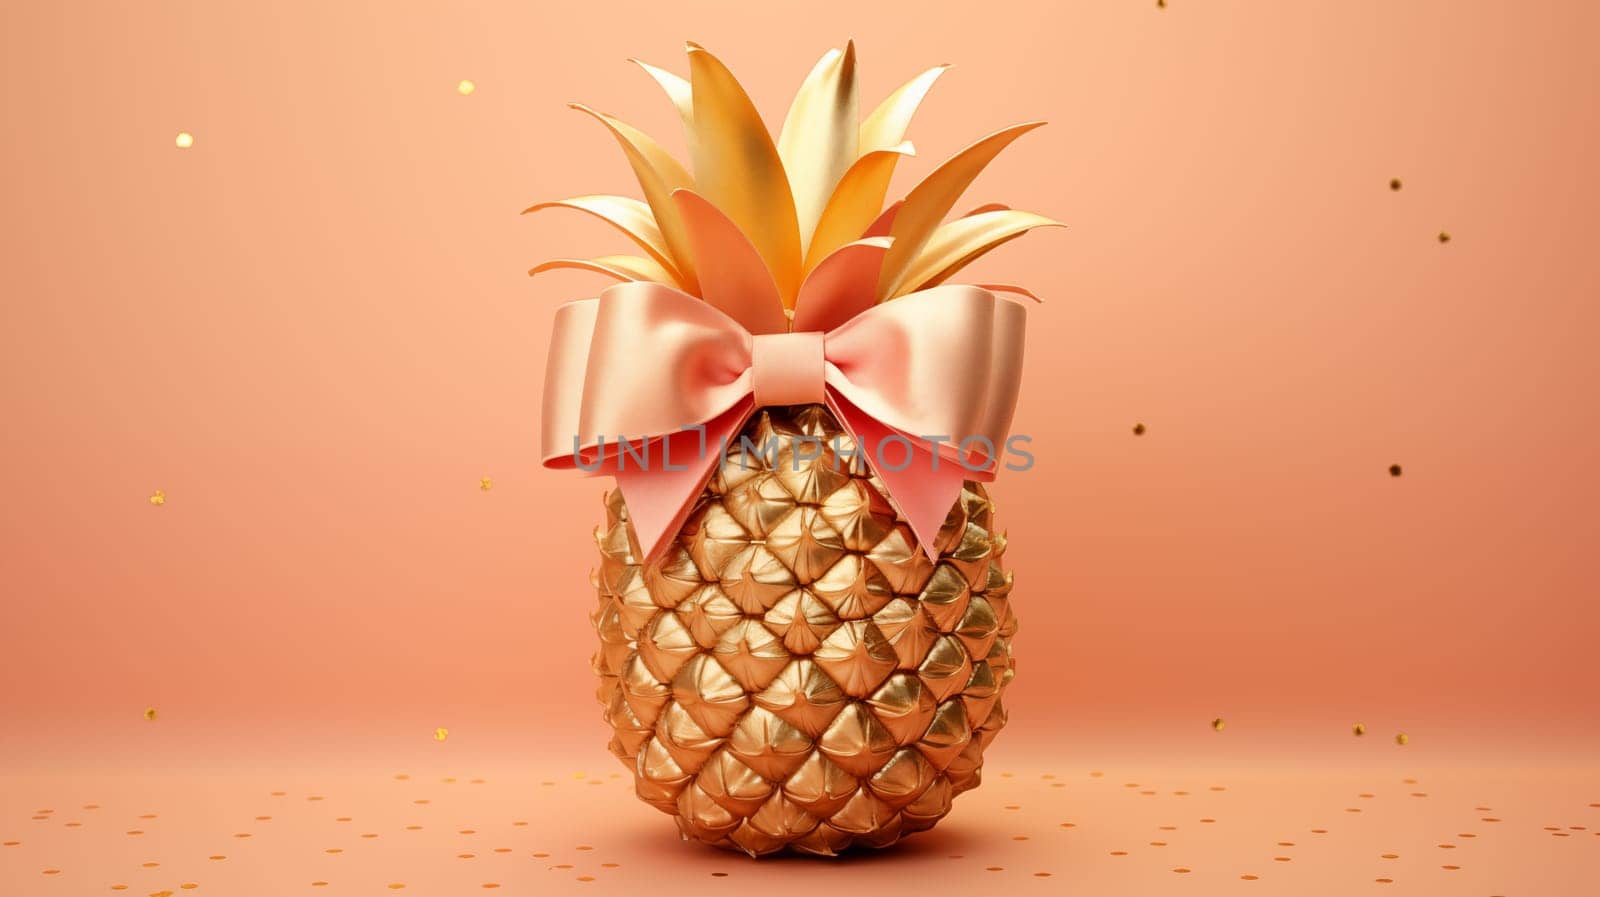 A golden pineapple with a pink bow is depicted on a peach background, golden confetti is scattered on the background.